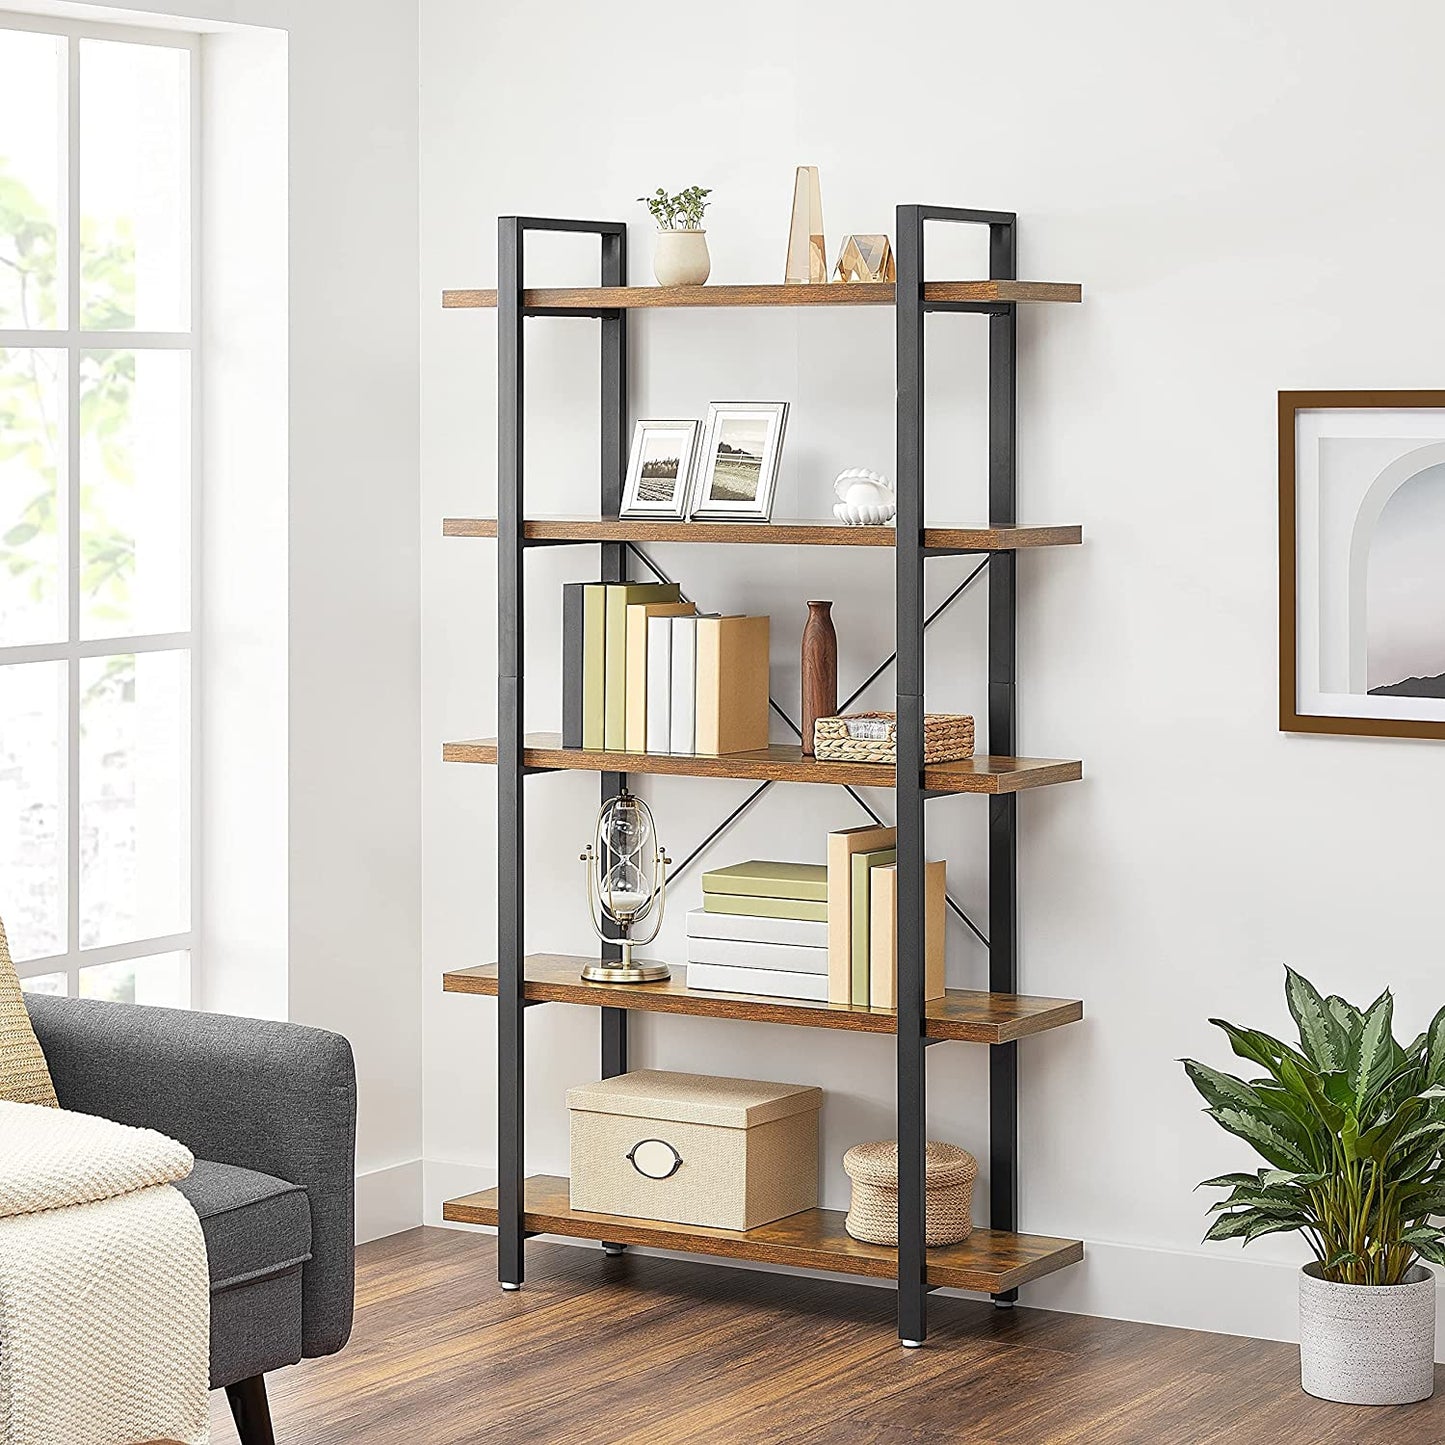 Bookshelf 5-Tier Industrial Stable Bookcase Rustic Brown and Black - image2